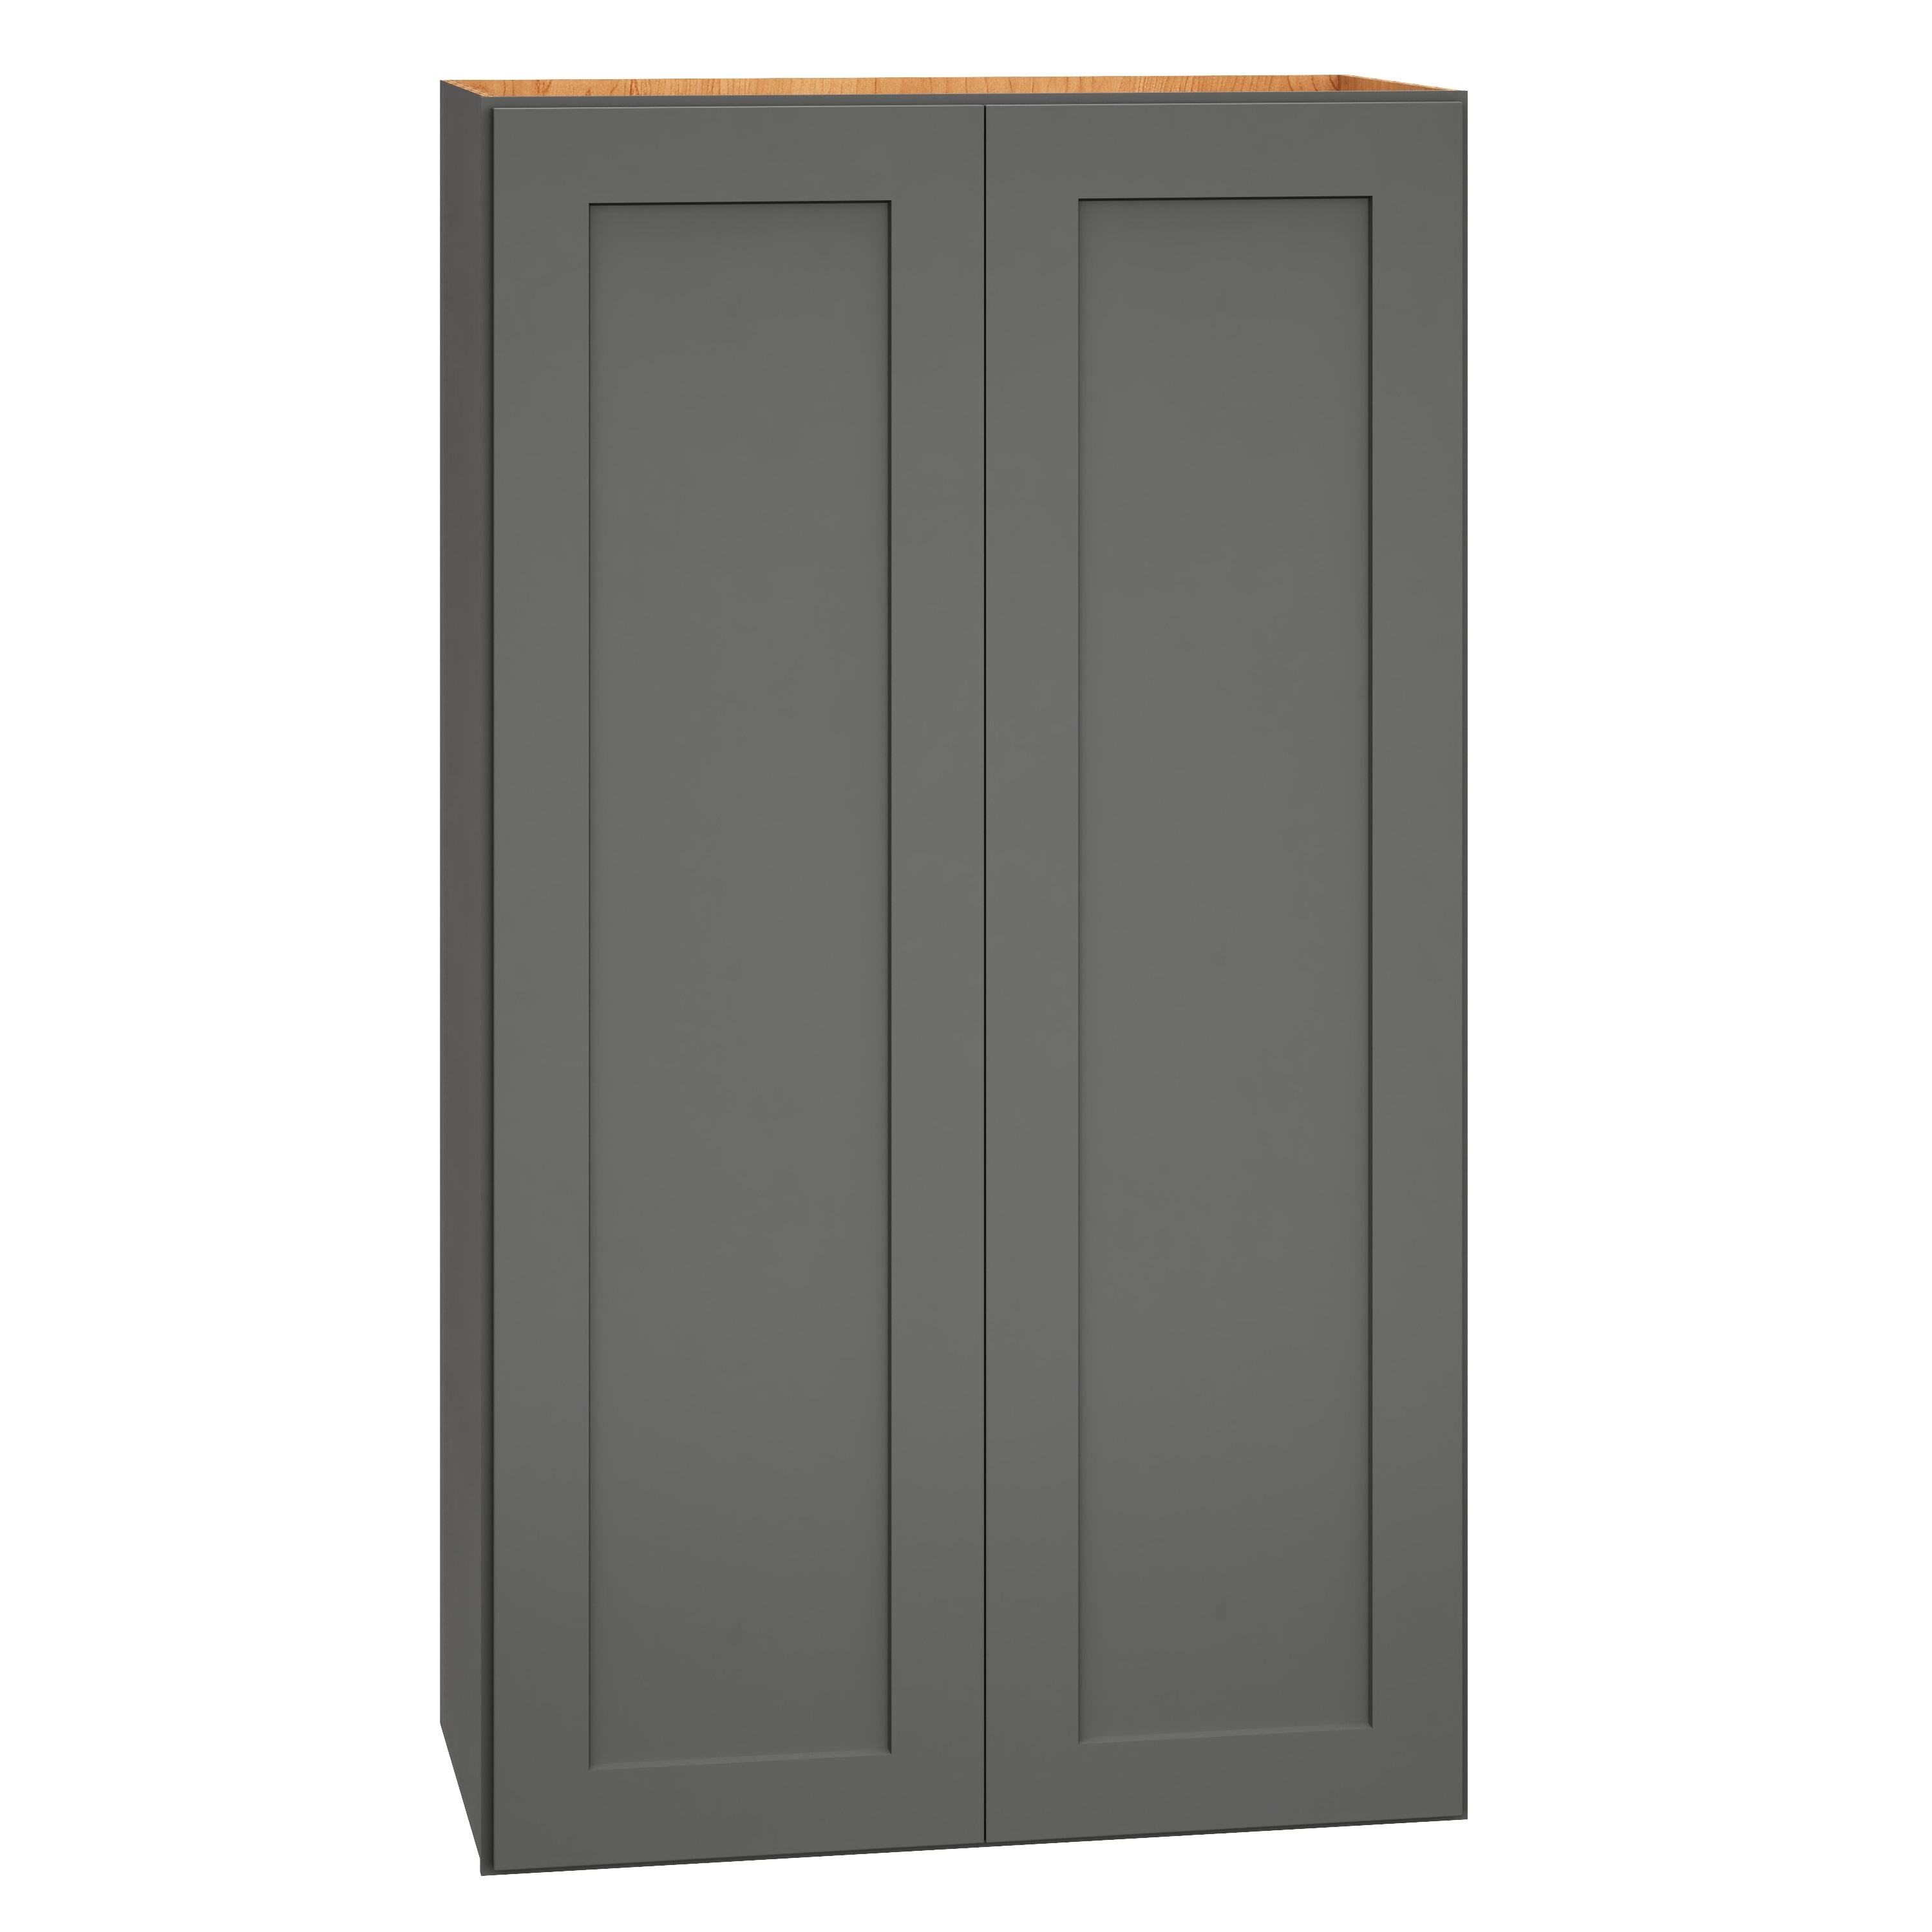 Diamond at Lowes - Organization - Wall Cabinet with Pull-Down Shelf